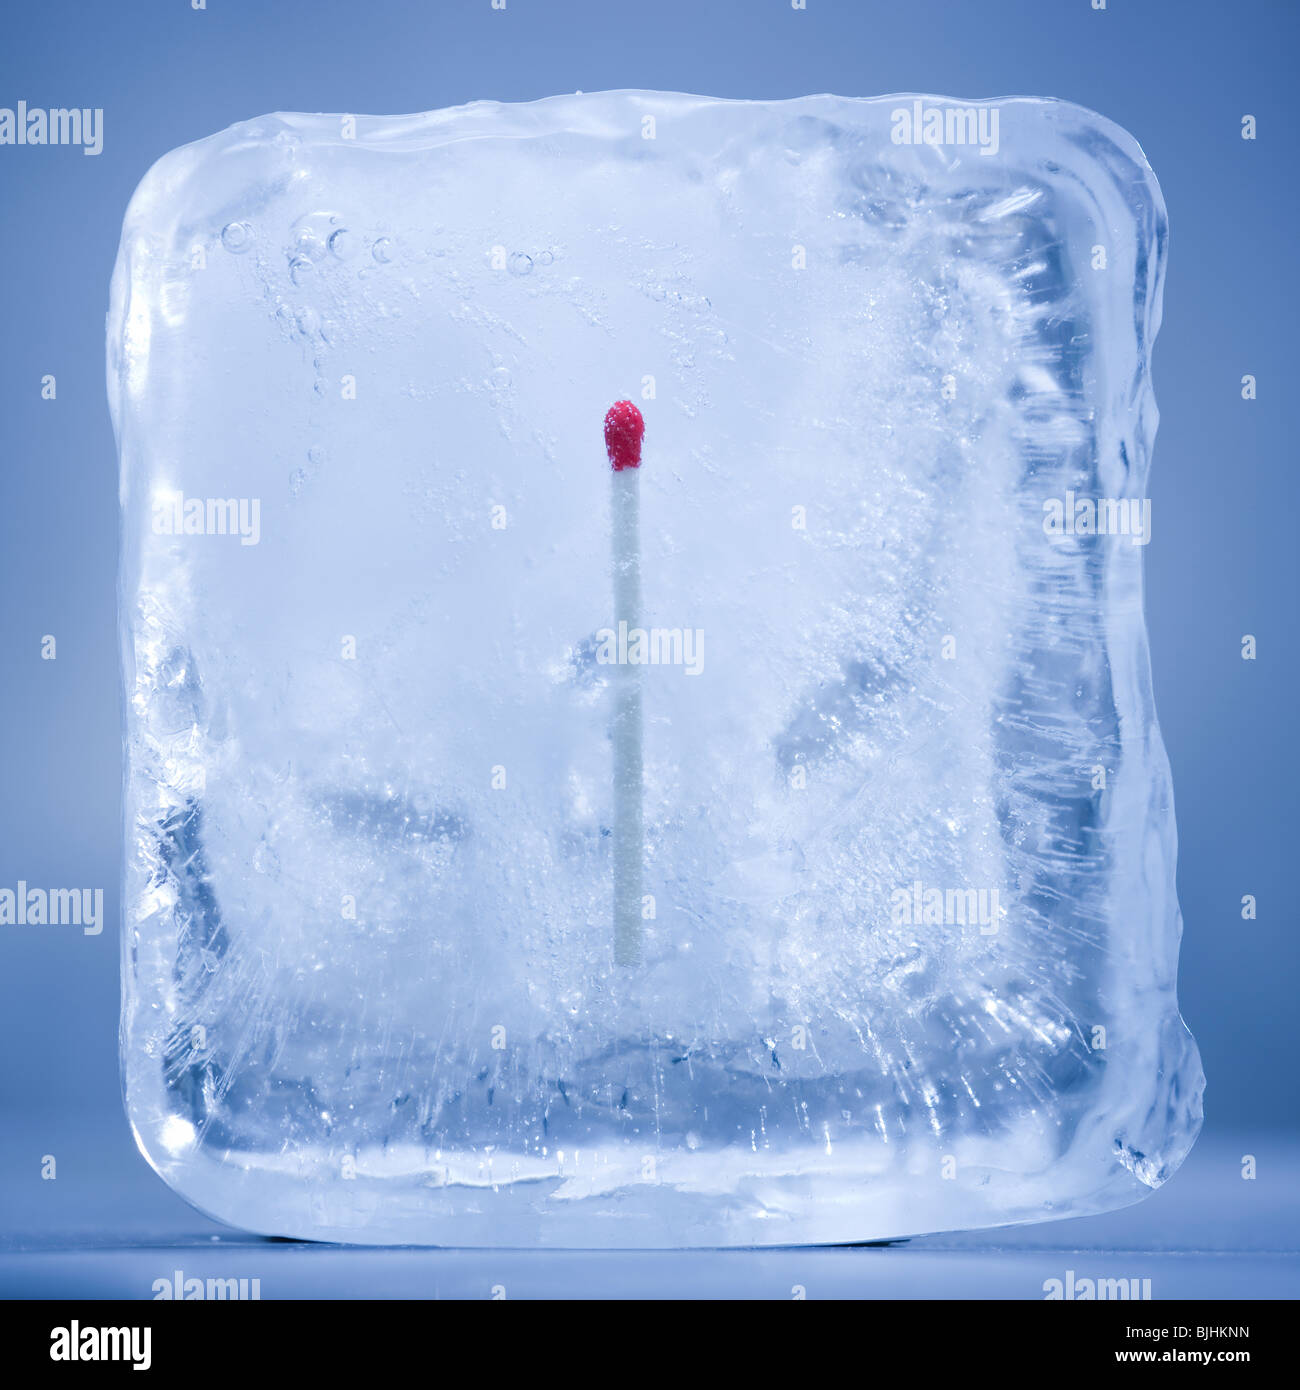 match frozen in a block of ice Stock Photo